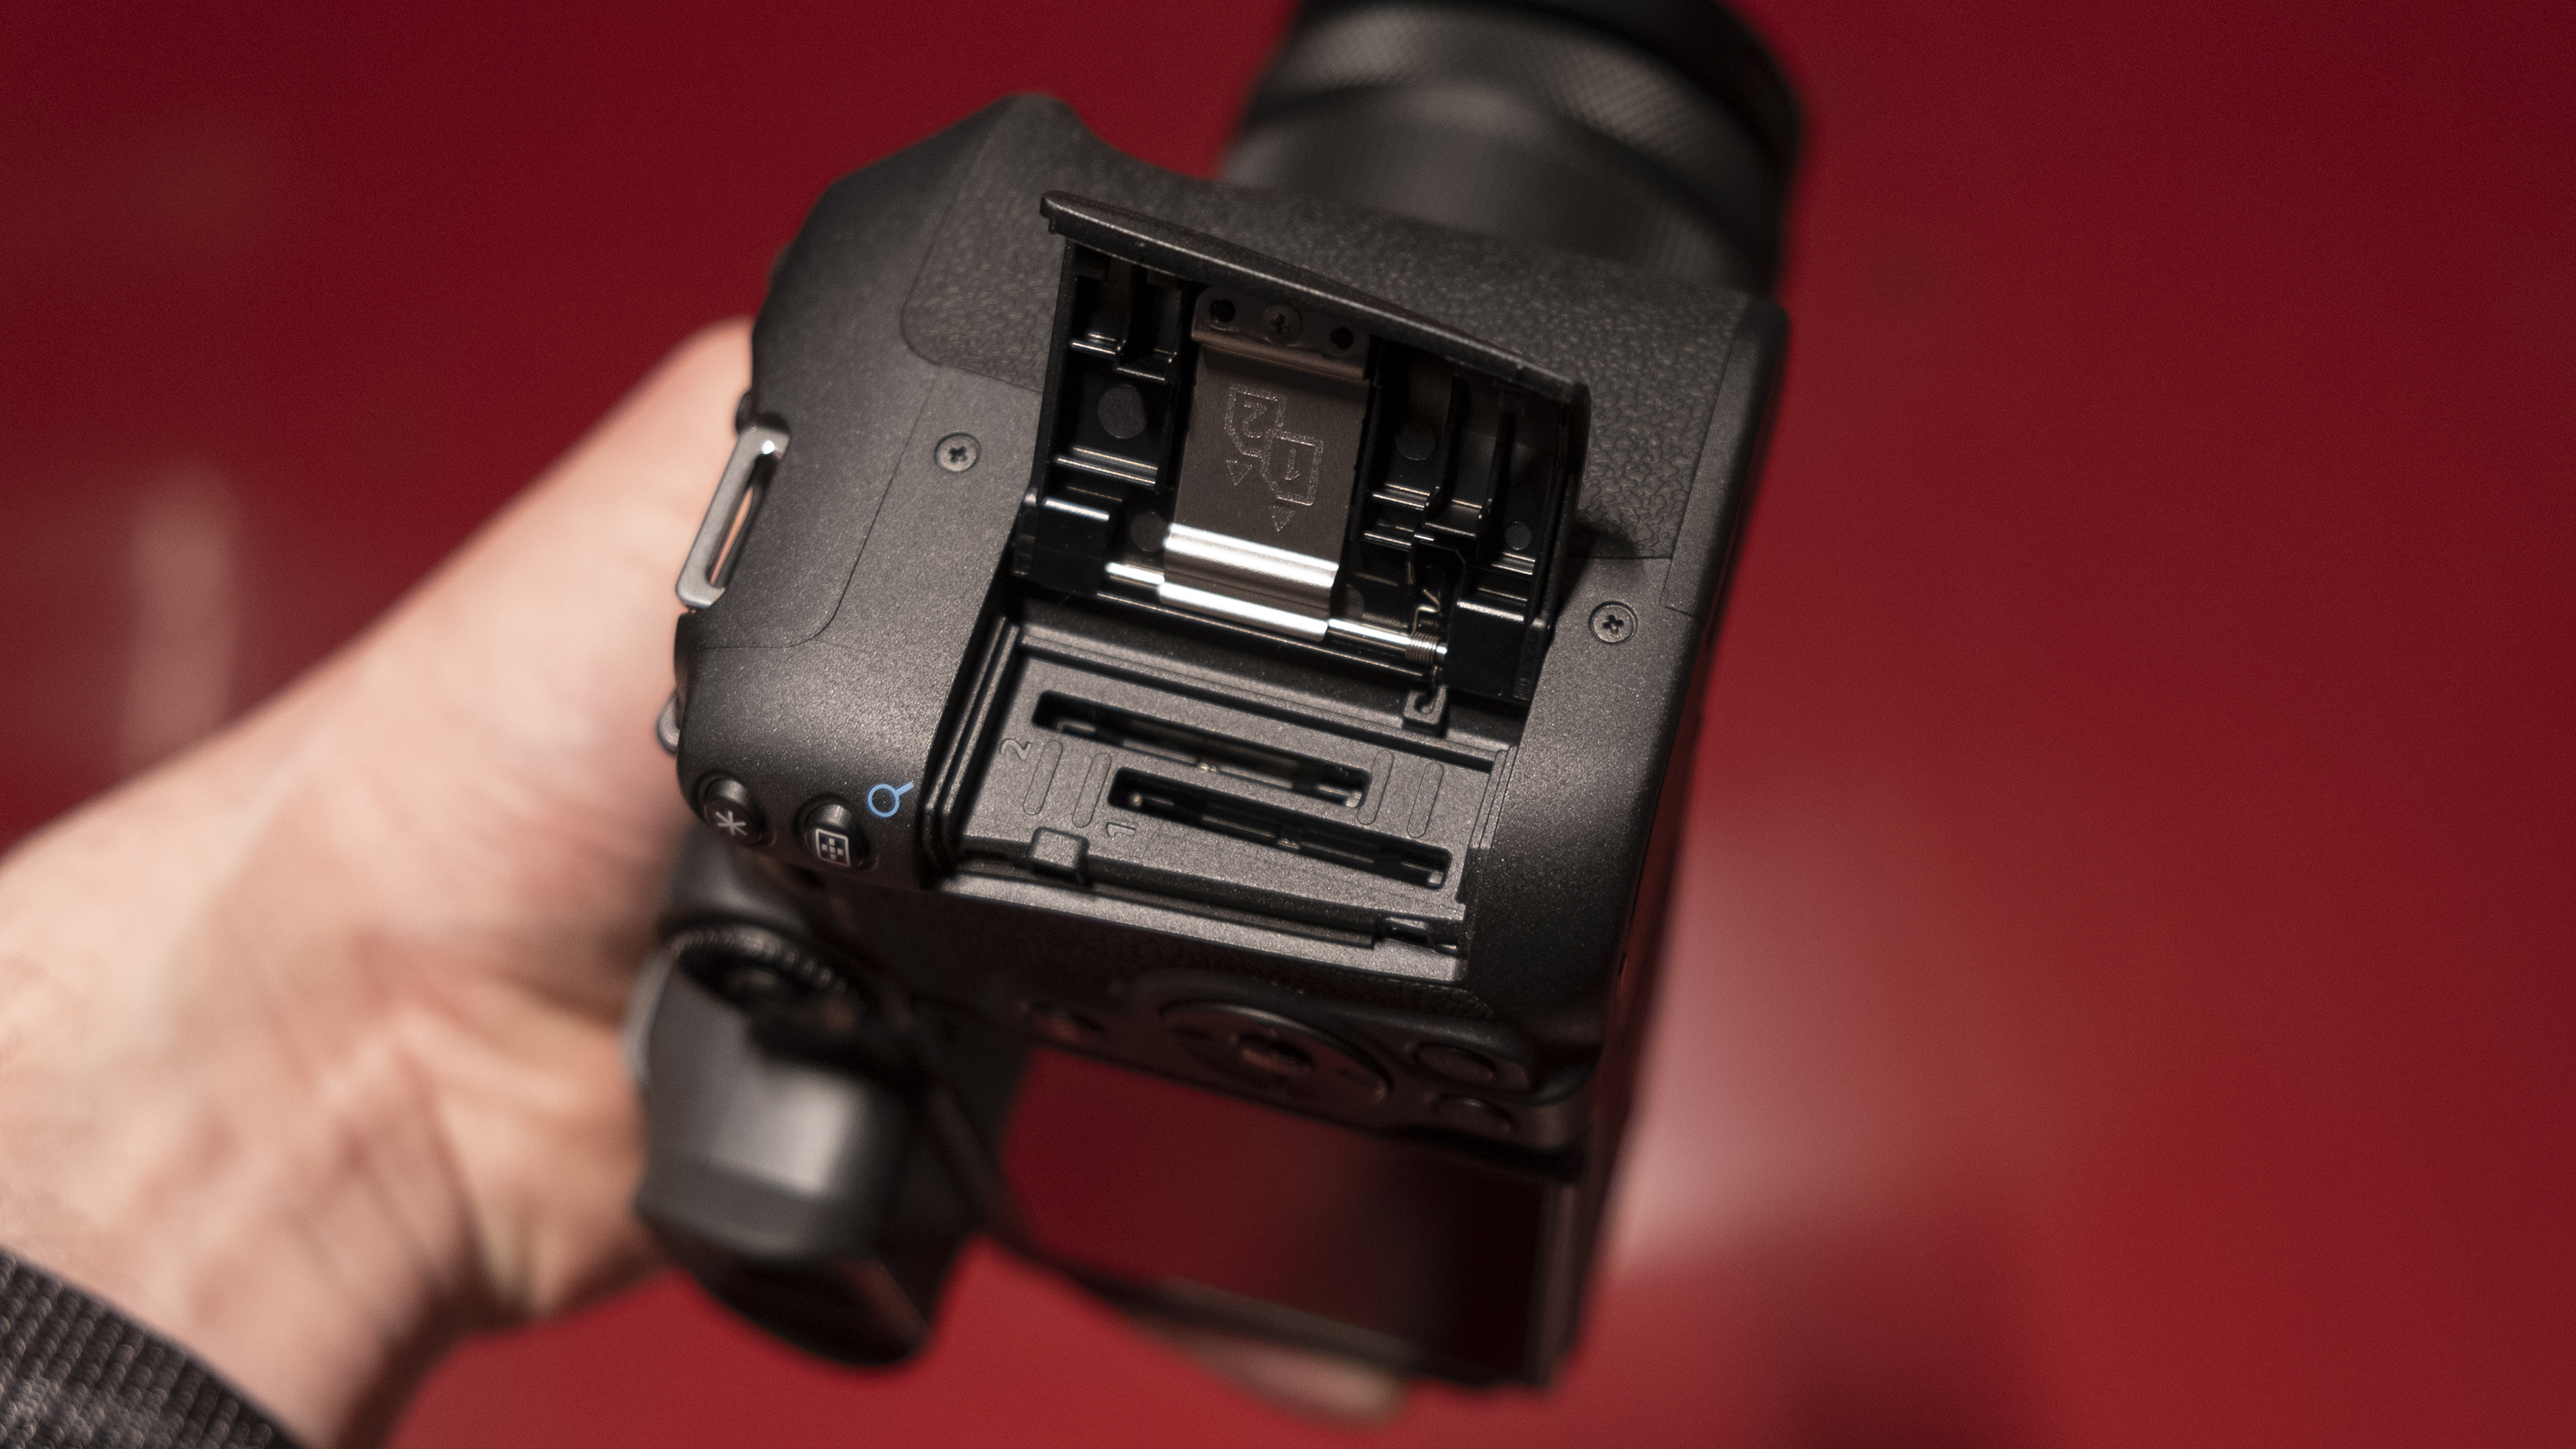 The card slots of the Canon EOS R7 camera